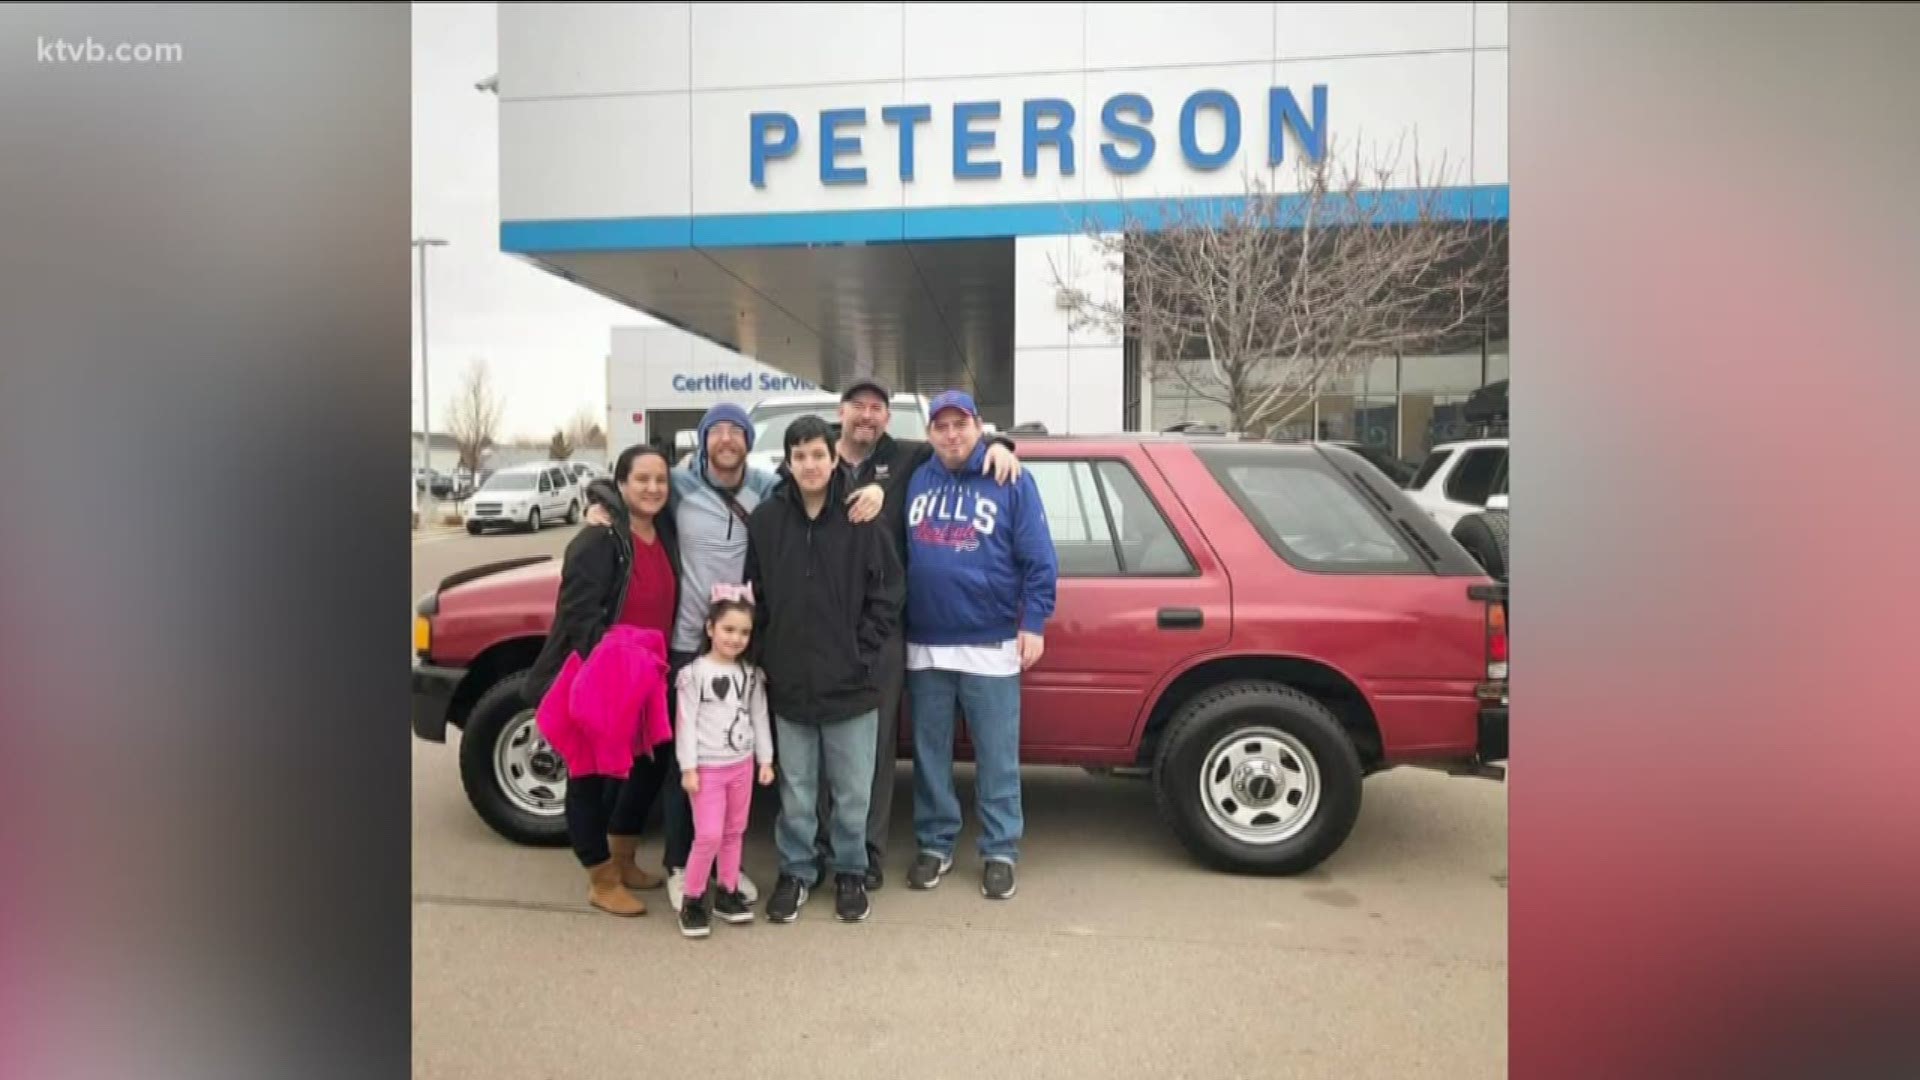 Jorge Ibanez is battling bone cancer and his family's SUV broke down so he and his family had no way to get him to his appointments. But a Boise dealership stepped in to cover the costs of repairs.